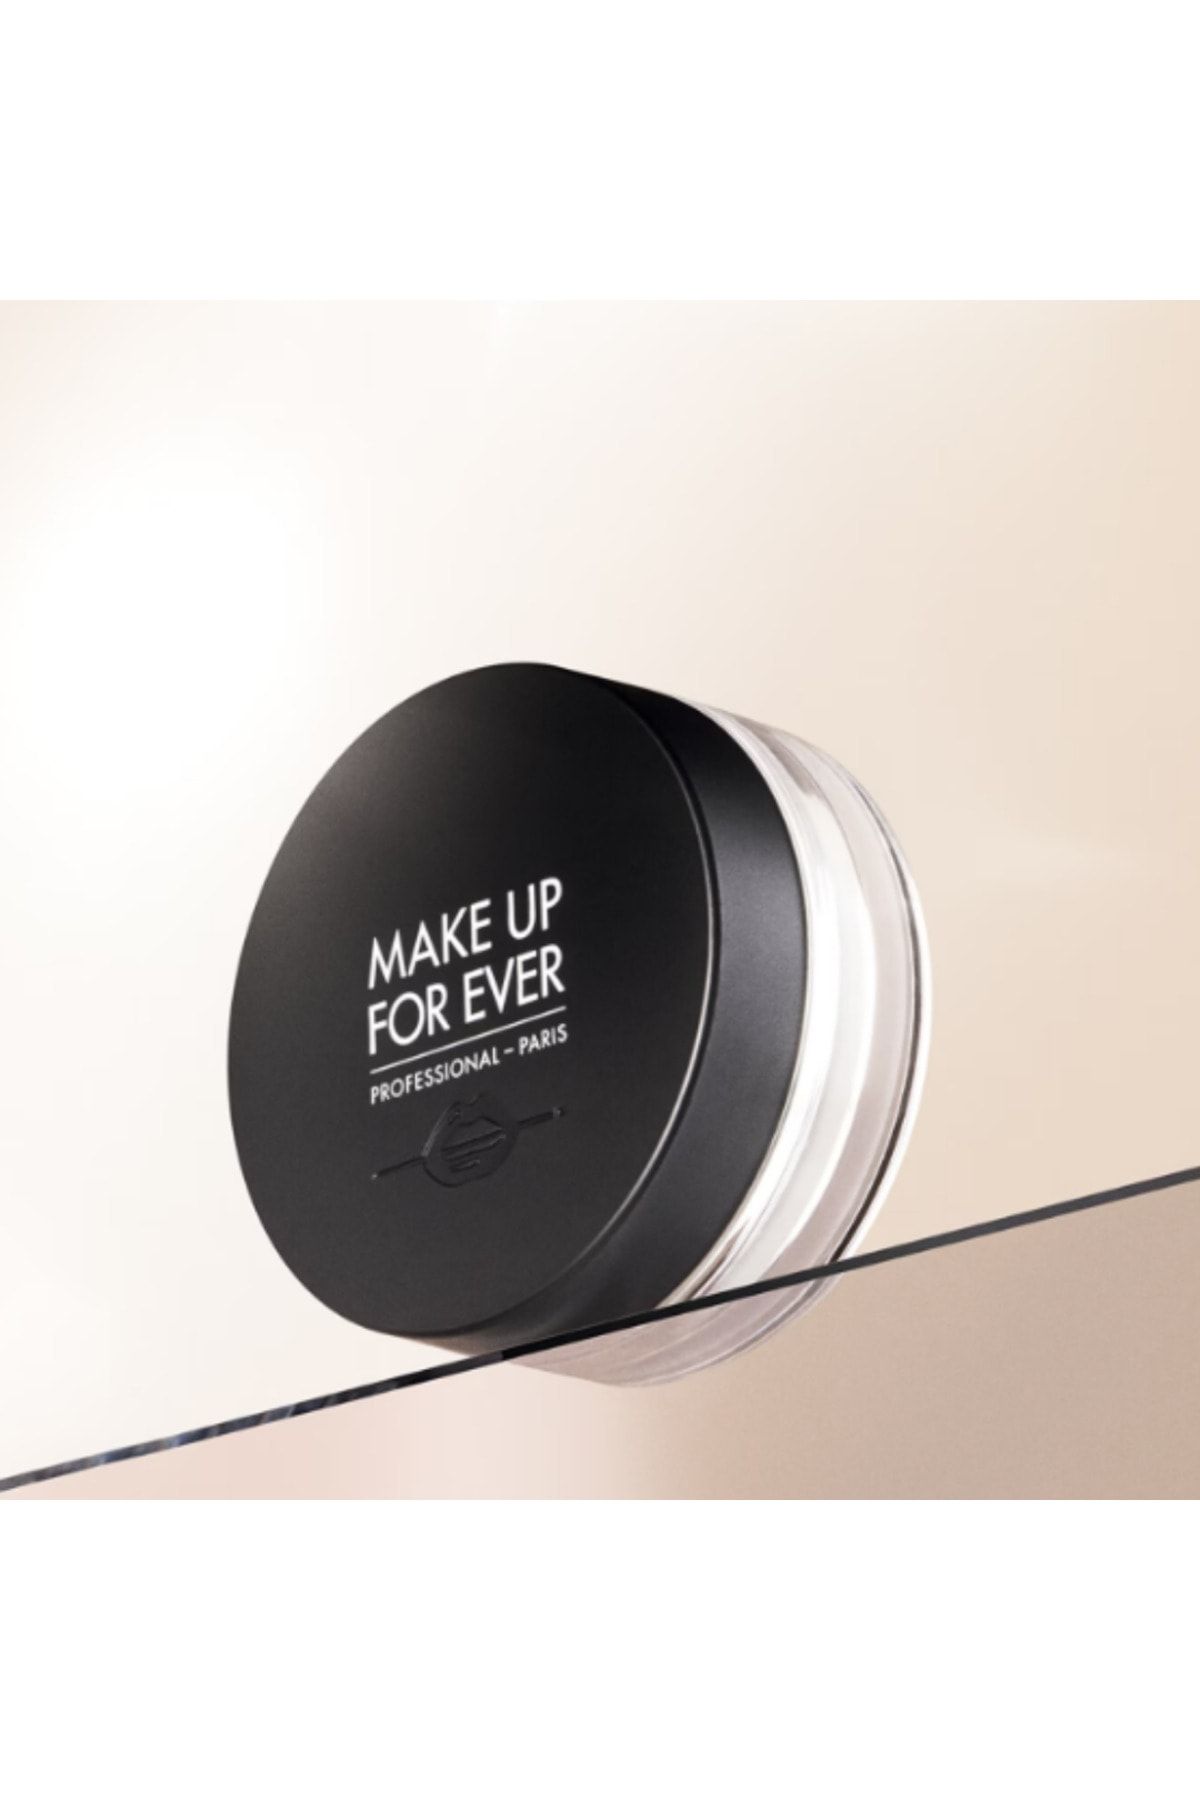 Make Up For Ever Poudre Ultra HD - Seyehat Boyu Pudra